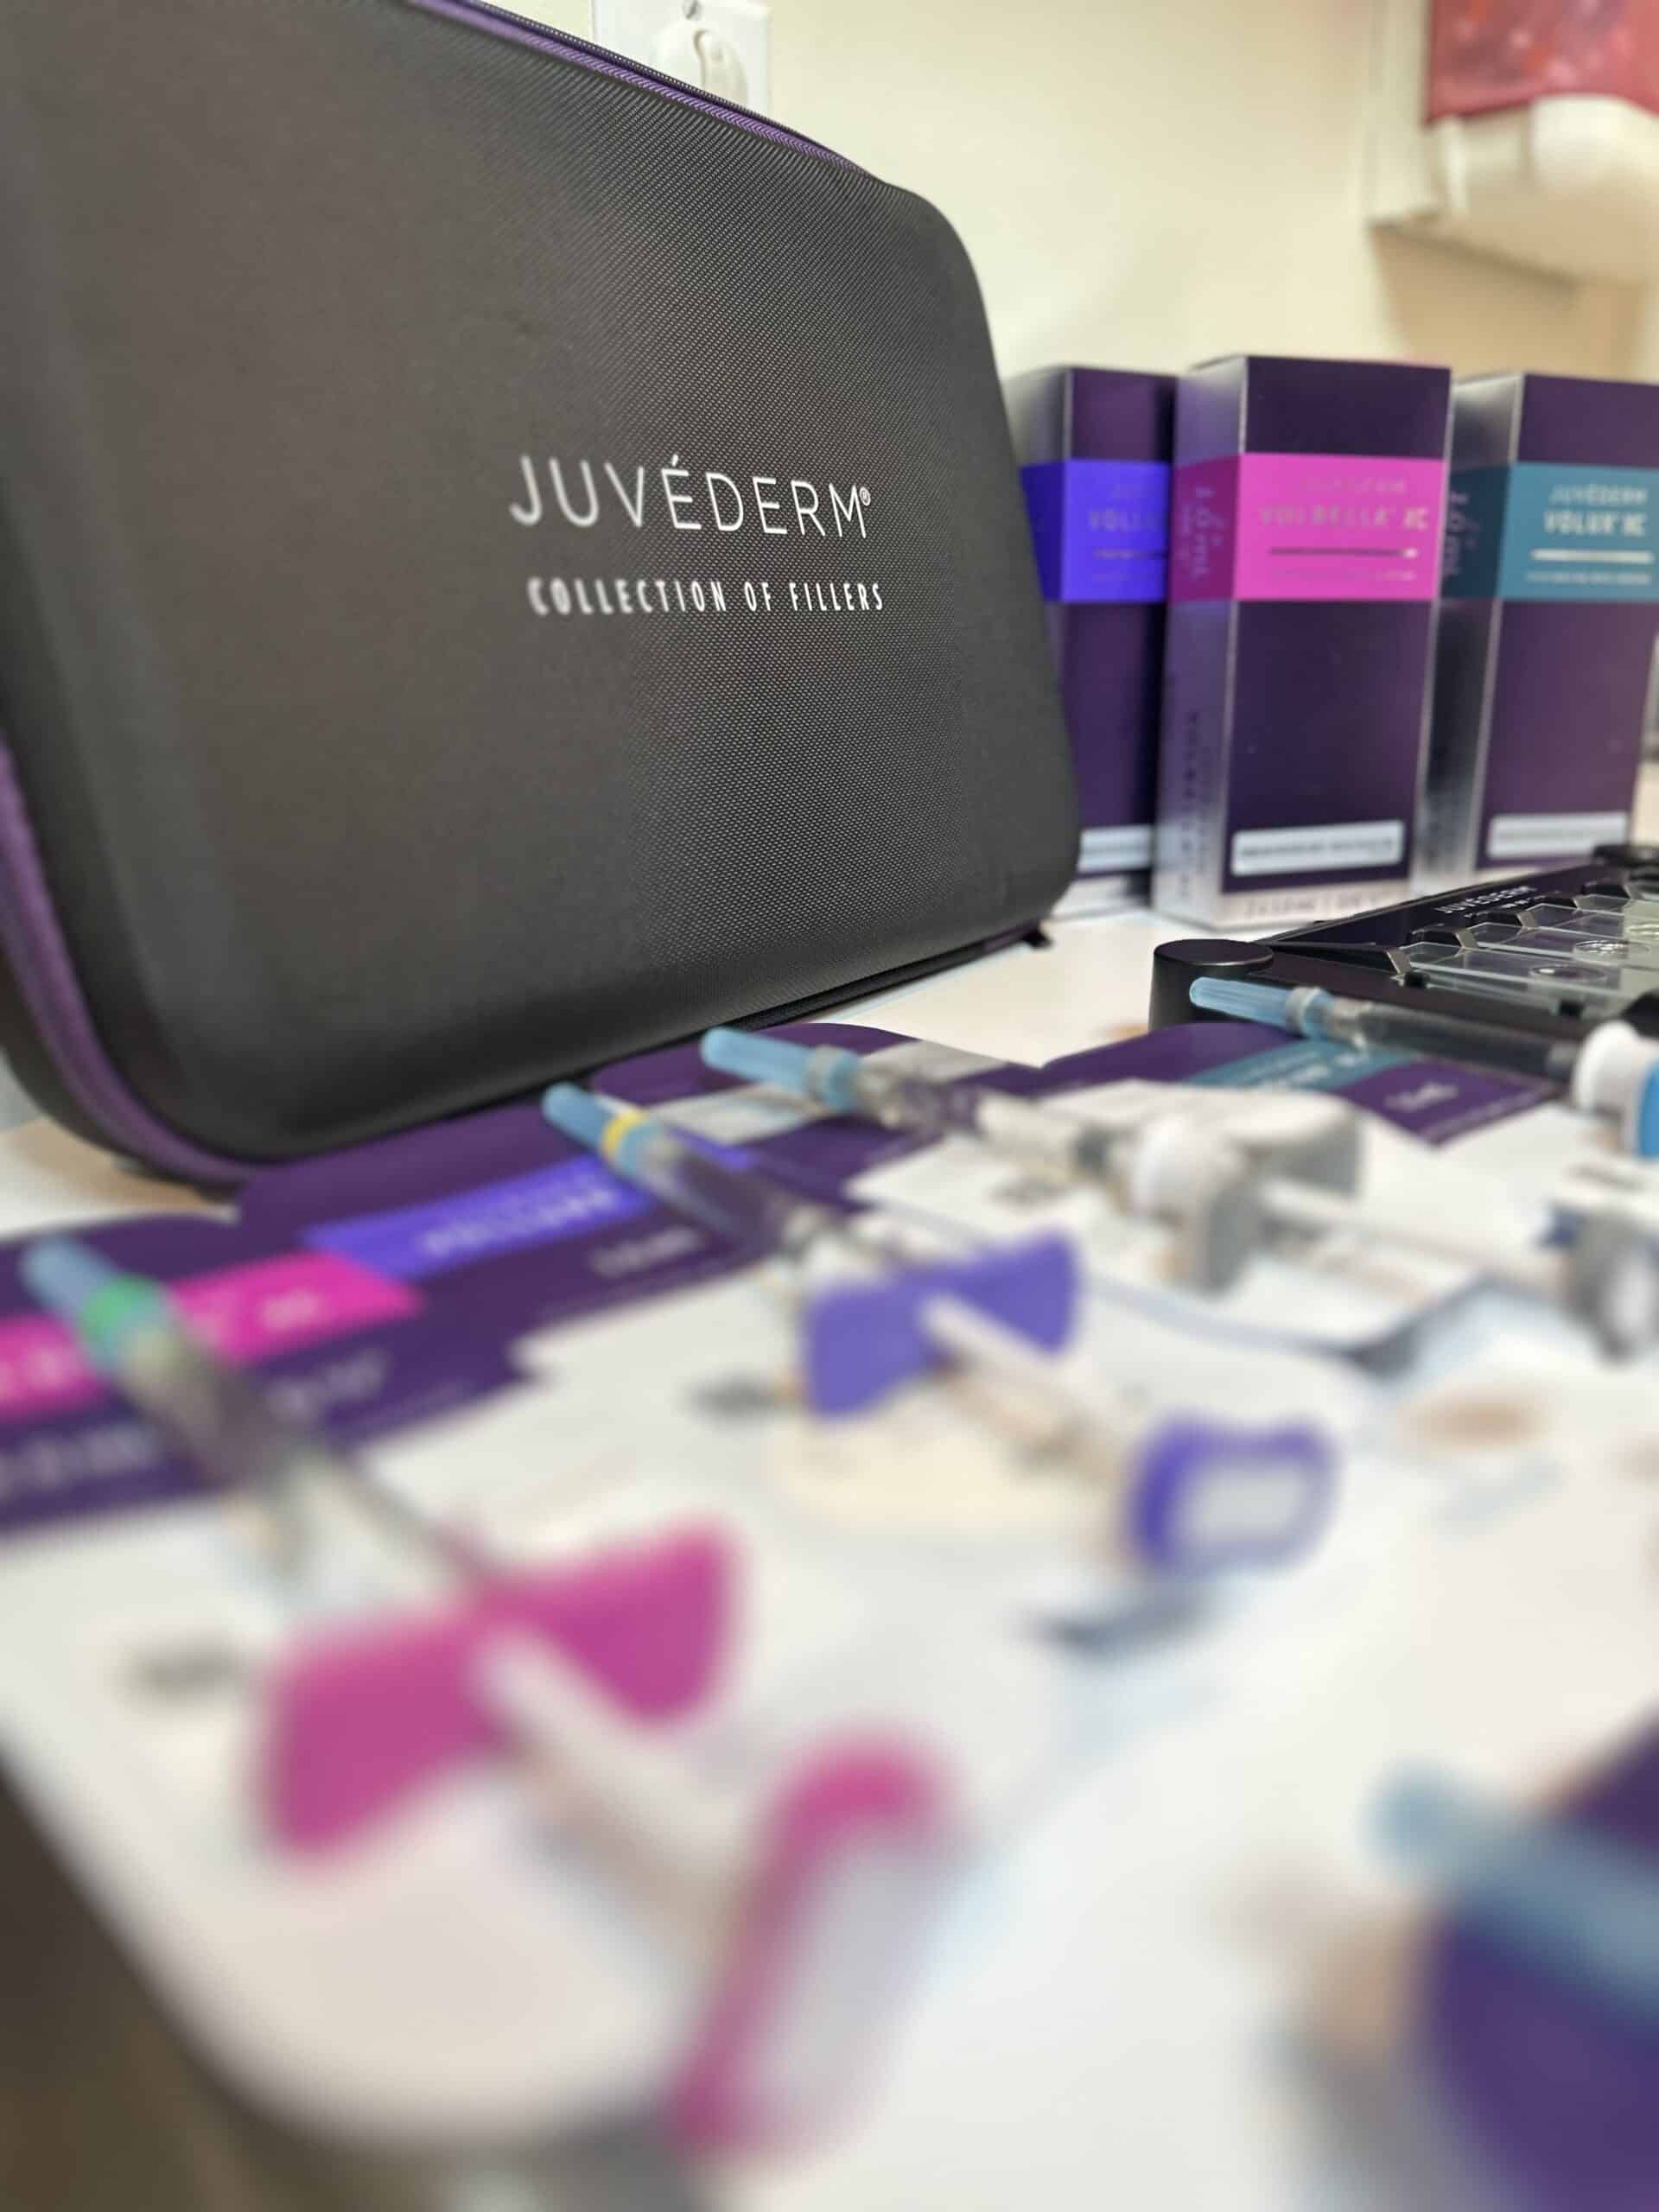 The entire Juvederm family of fillers available at Blue Medical Spa.